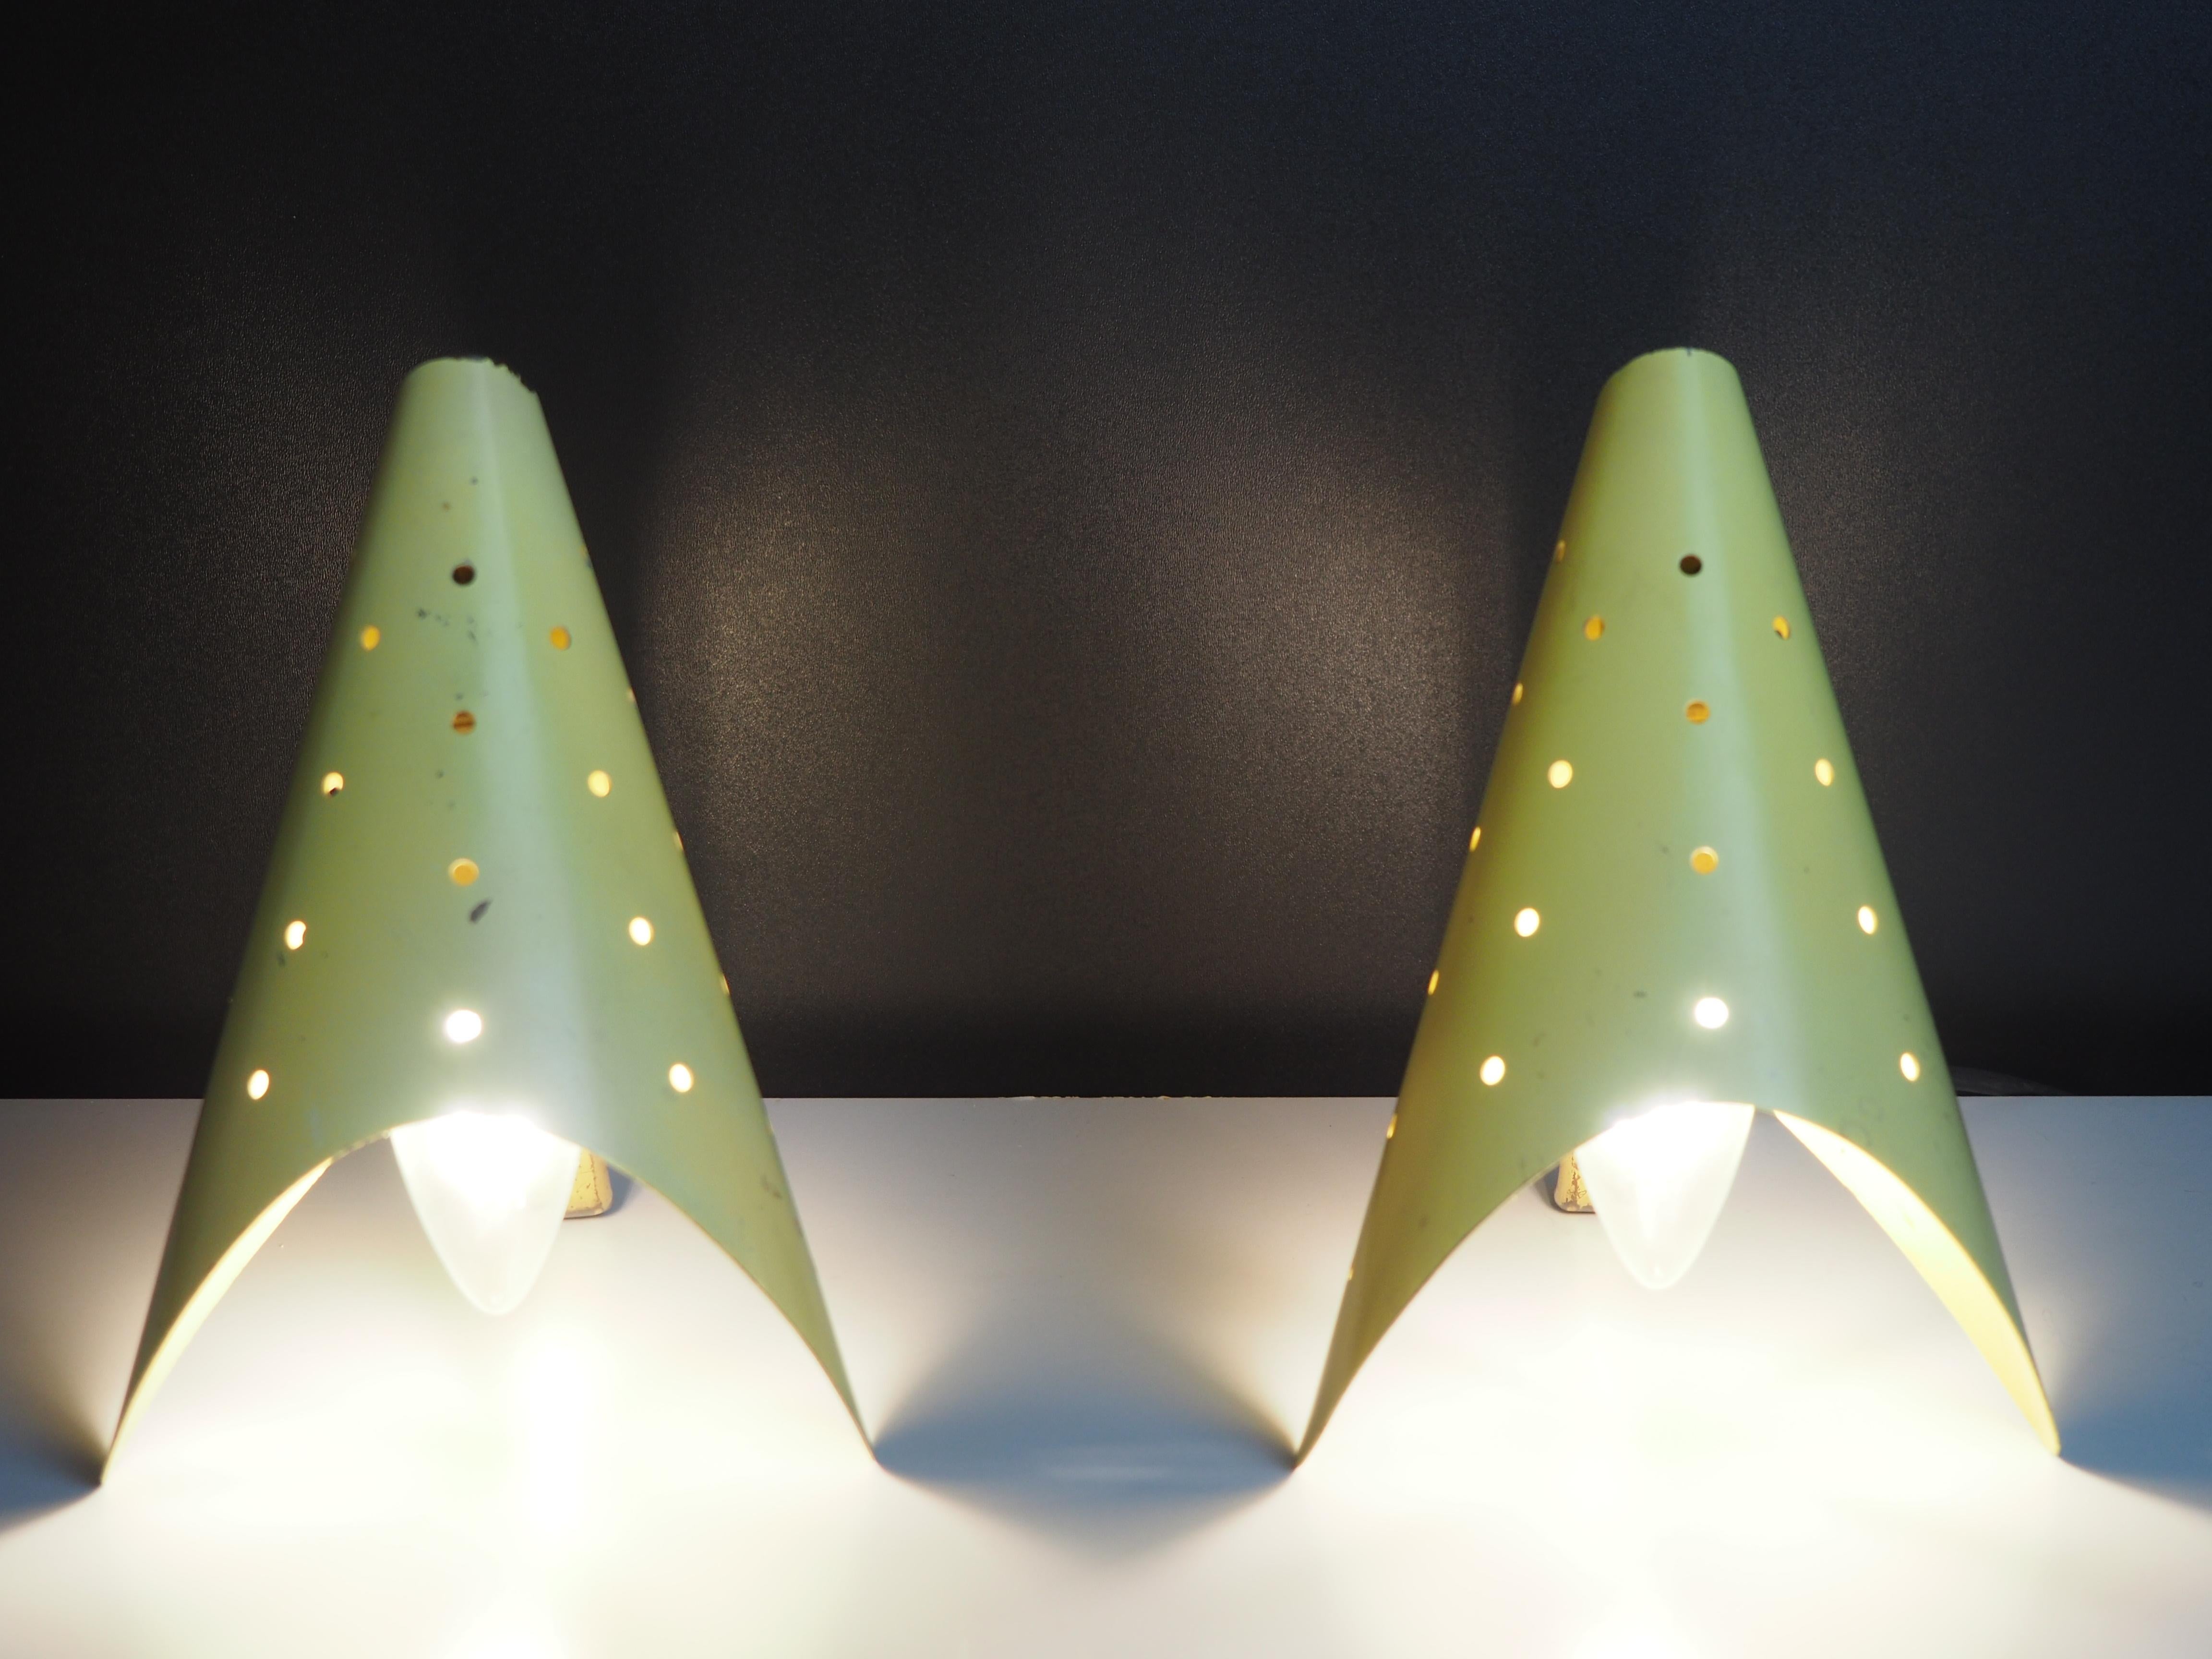 Mid-Century Modern Pair of Small Yellow Table Lamps Attr. to Stilnovo, circa 1950s For Sale